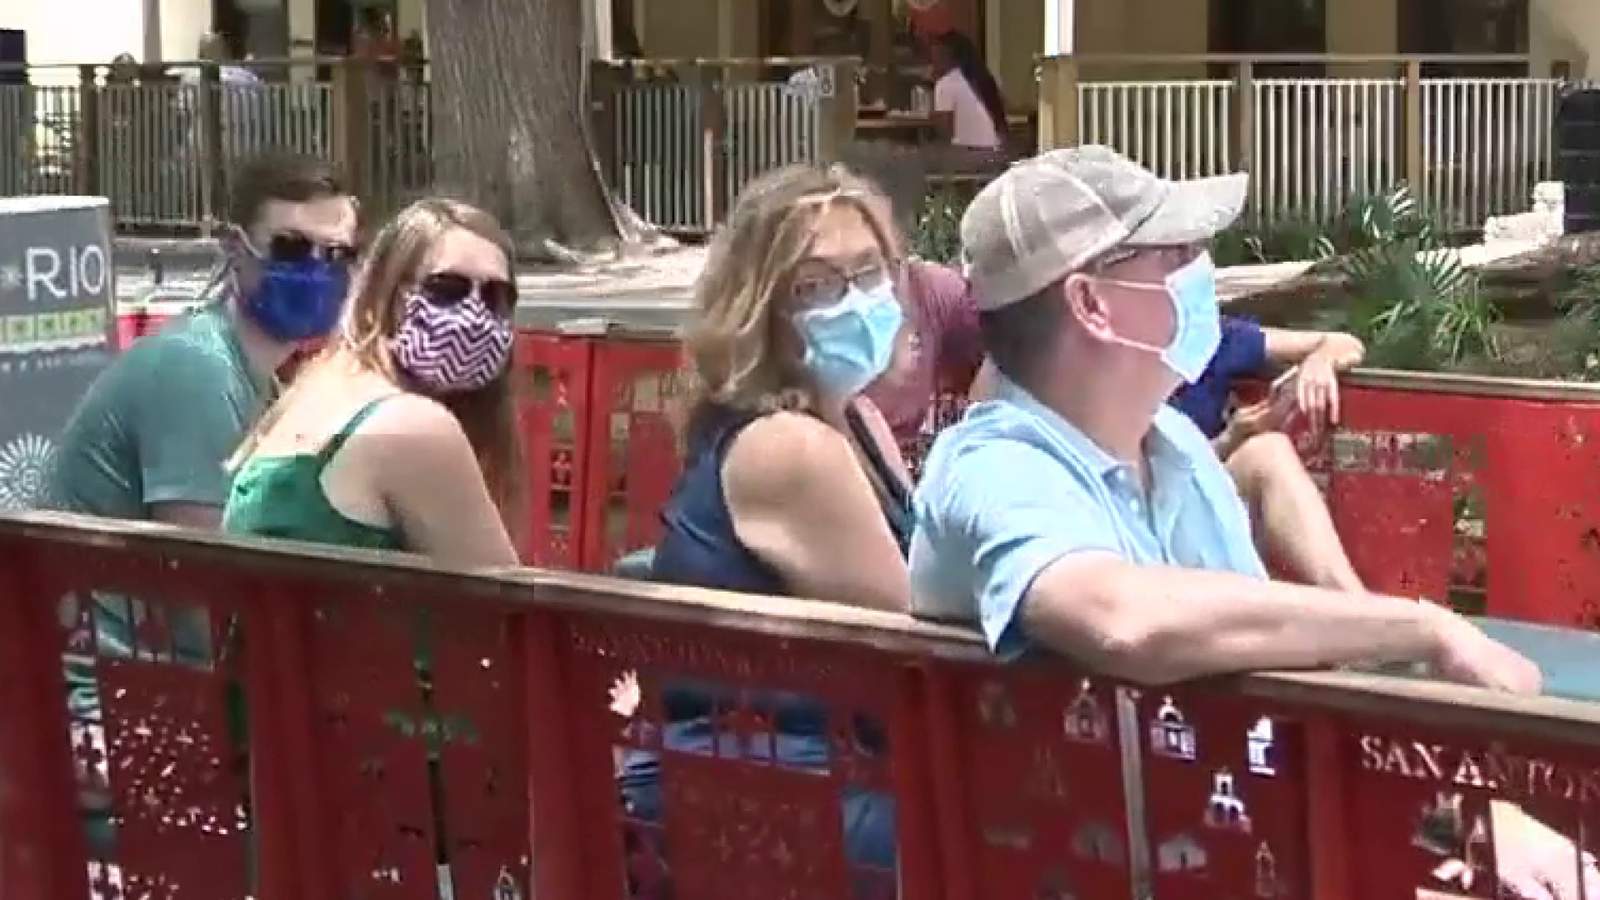 Governor’s mask mandate overdue but welcomed, San Antonio, Bexar County leaders say